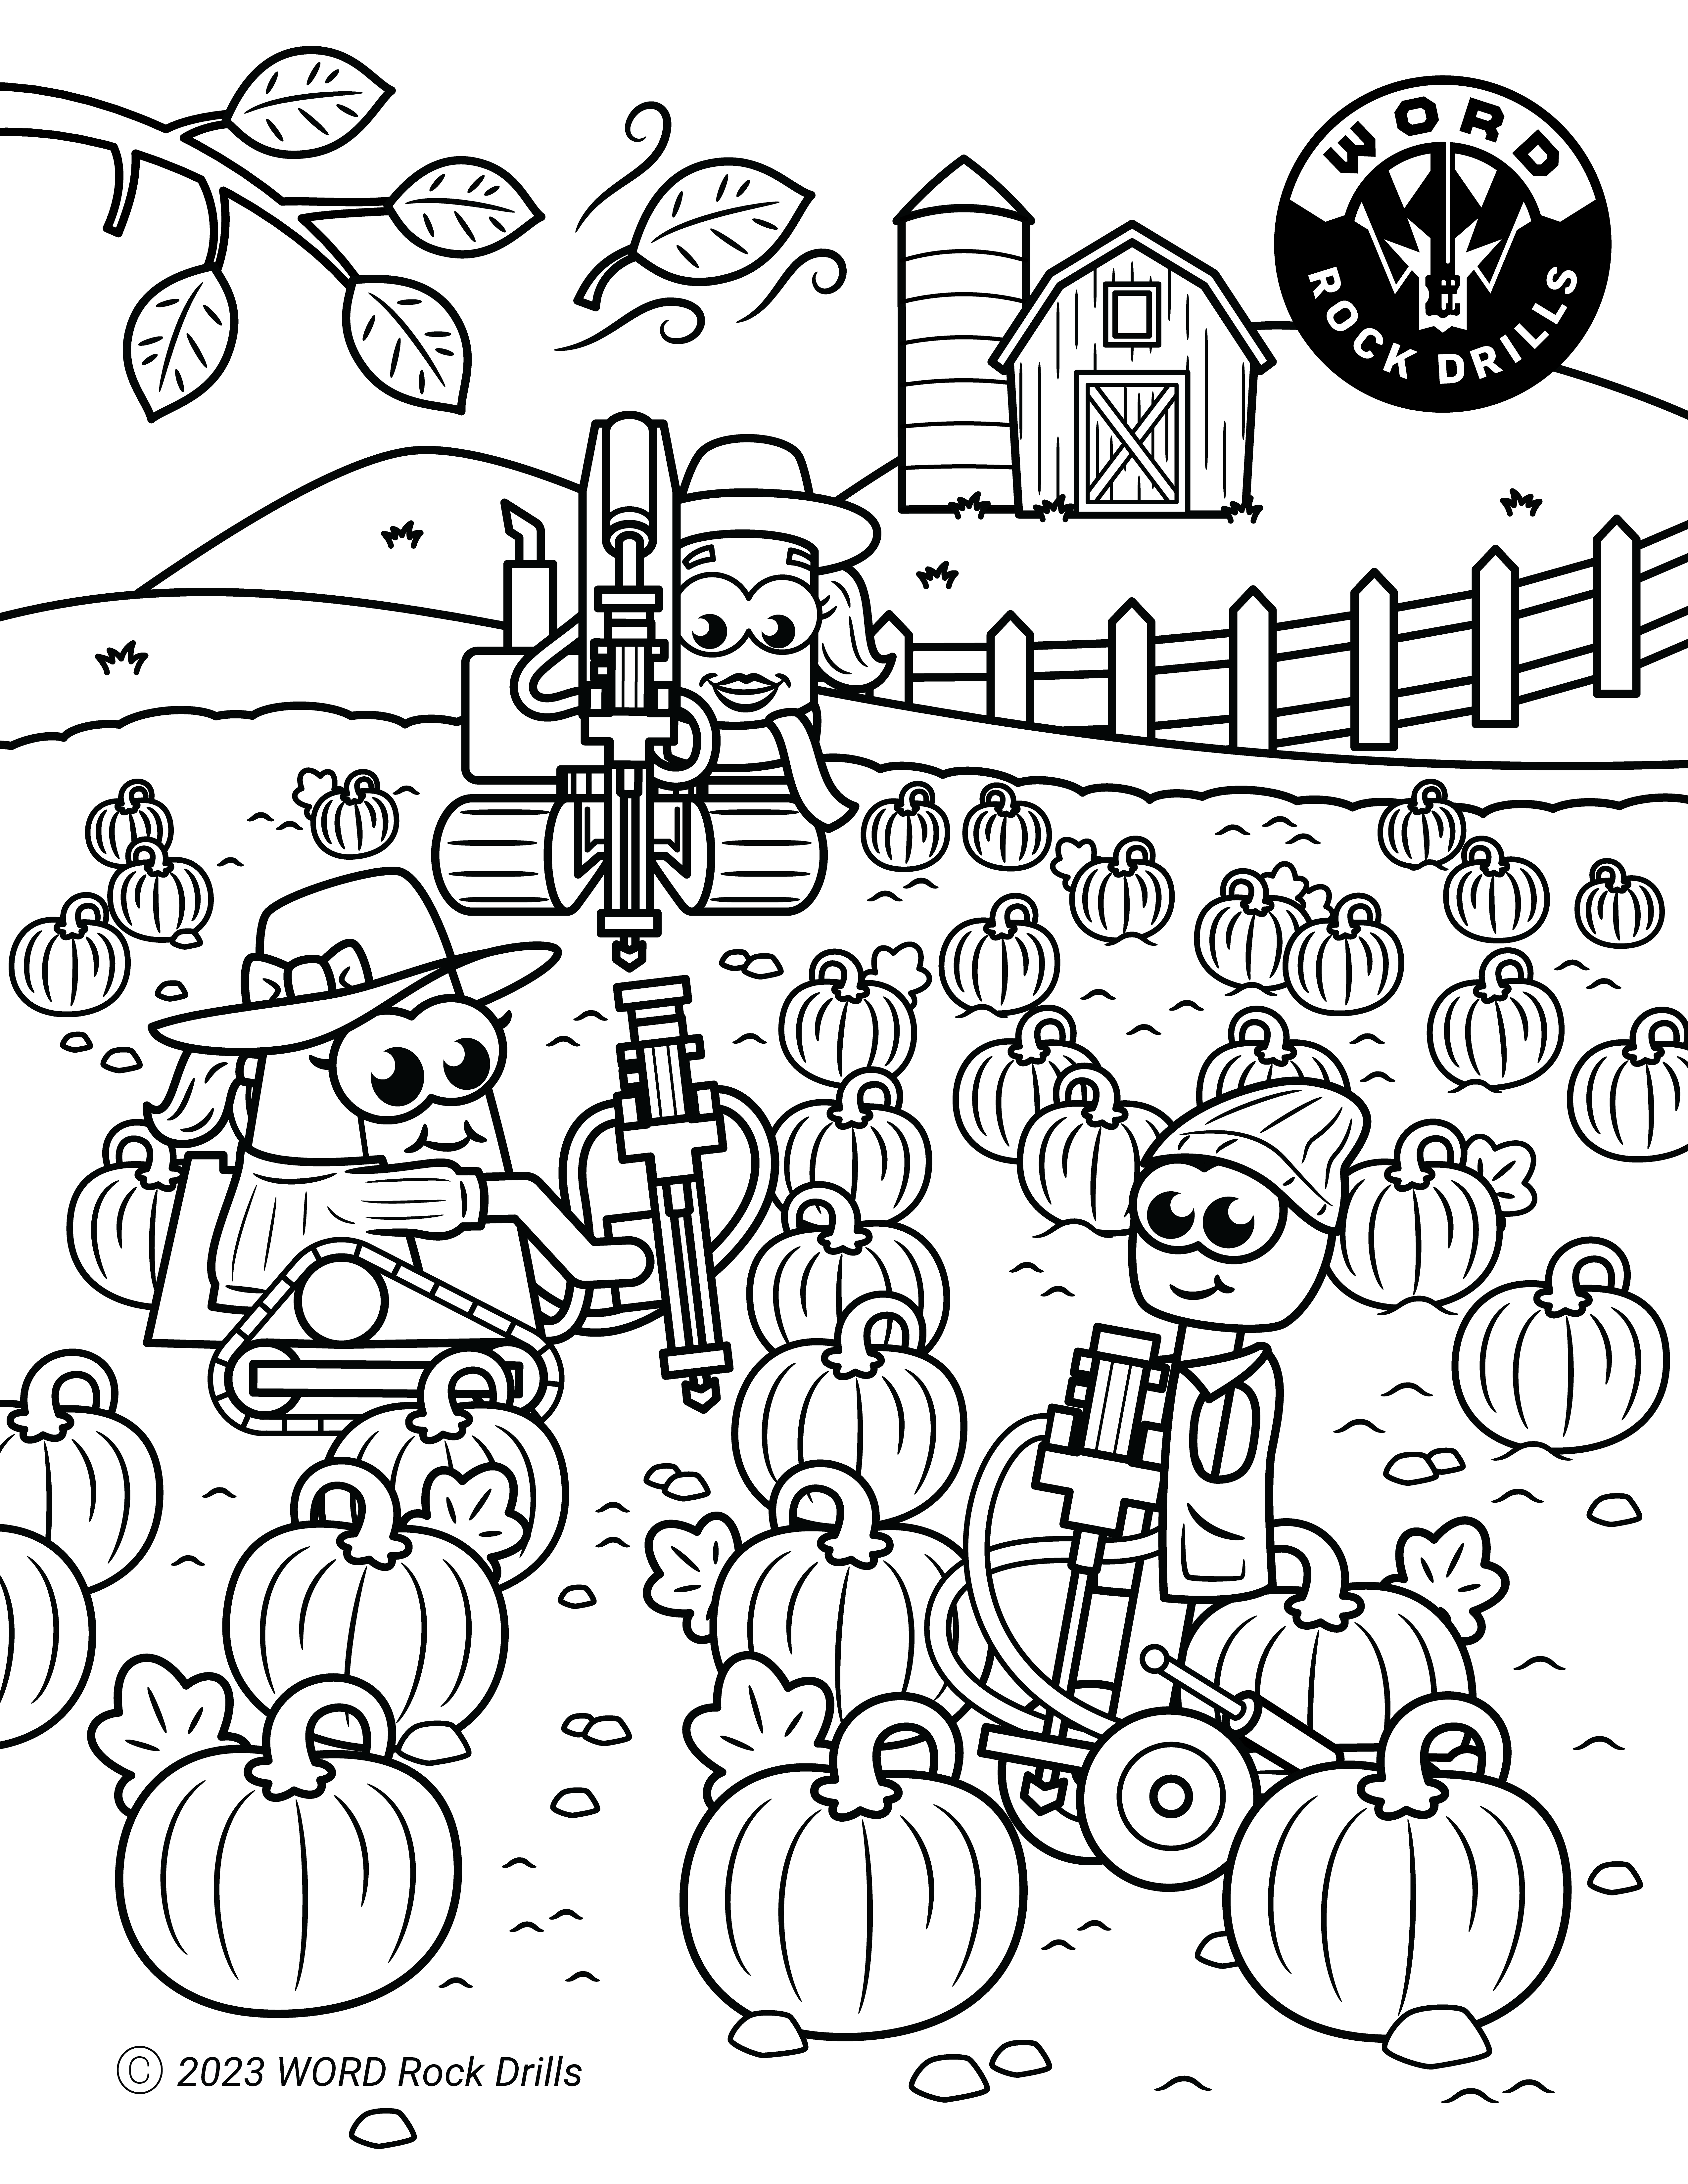 Free rock drill coloring pages to pass the time word rock drills